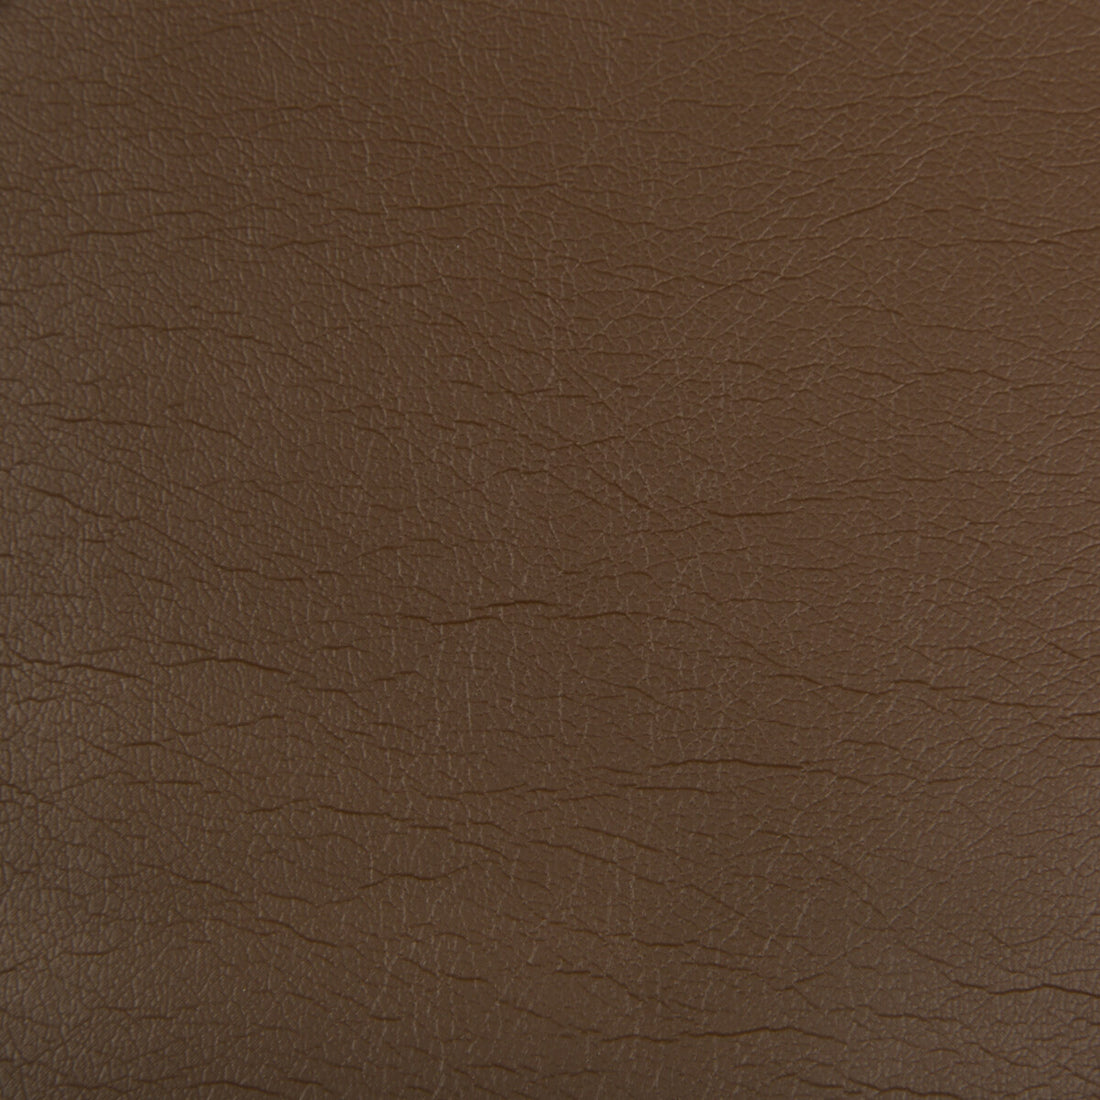 Optima fabric in carob color - pattern OPTIMA.66.0 - by Kravet Contract